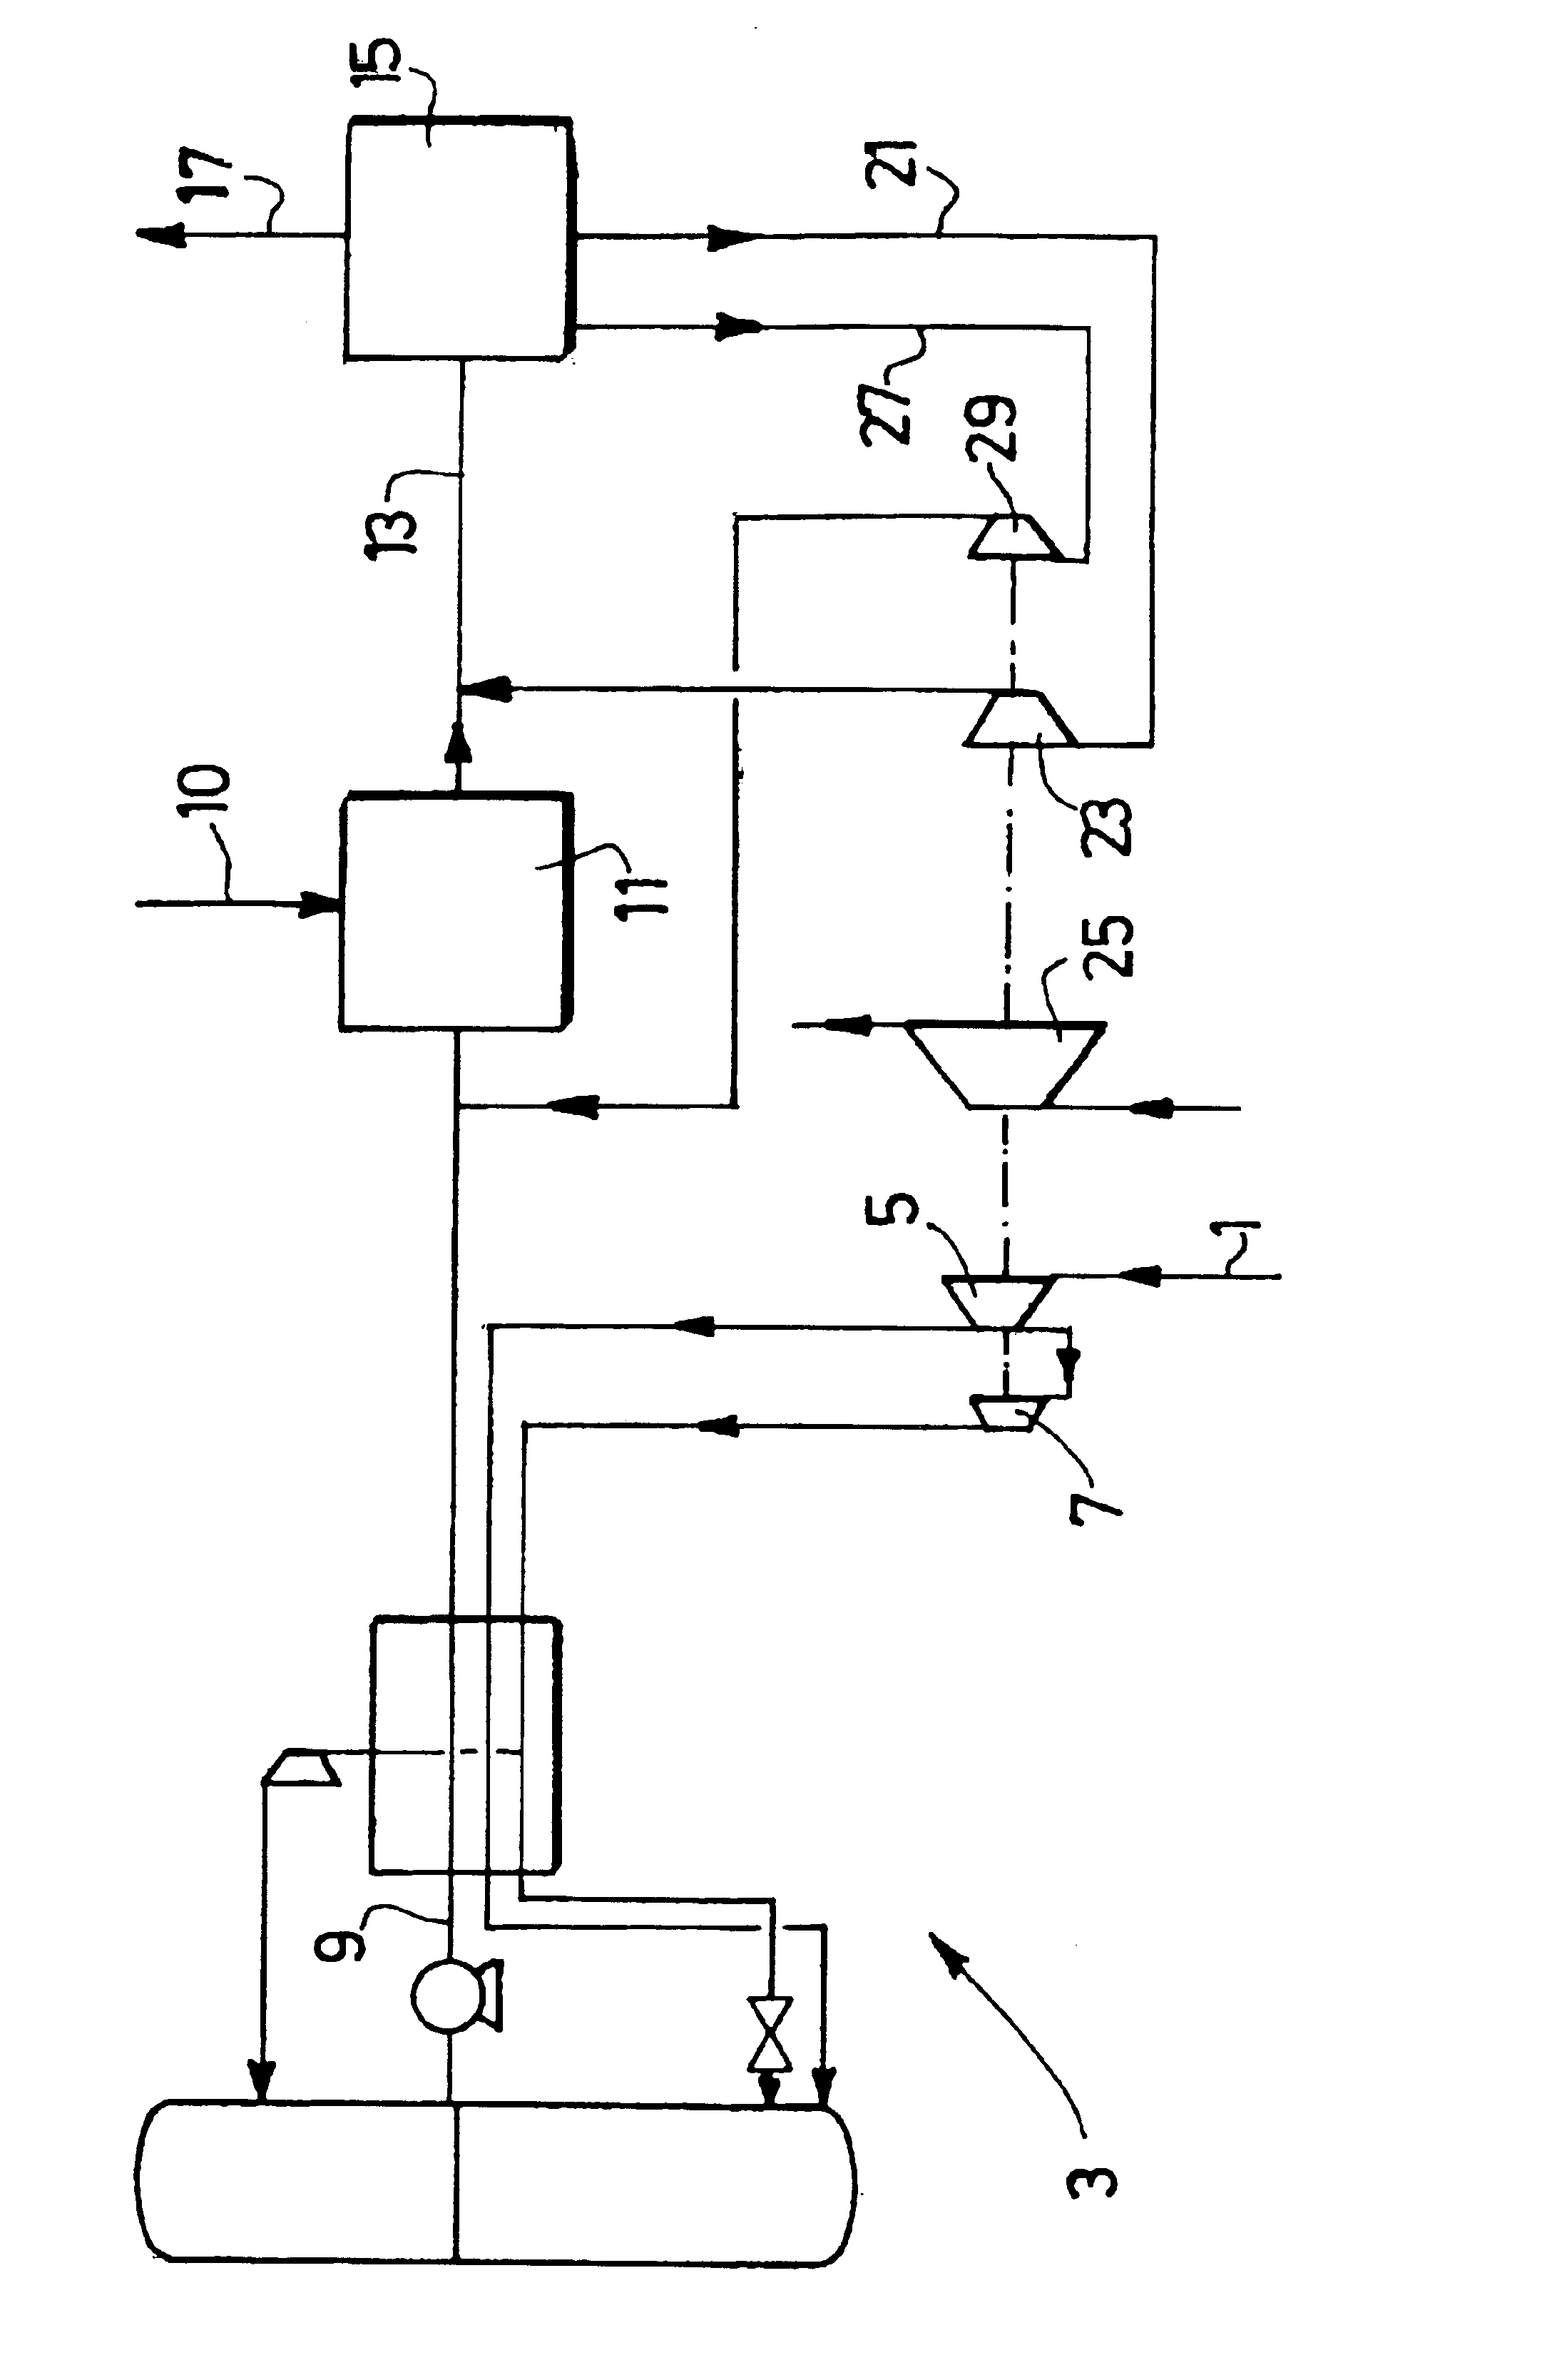 Process and apparatus for the production of methanol